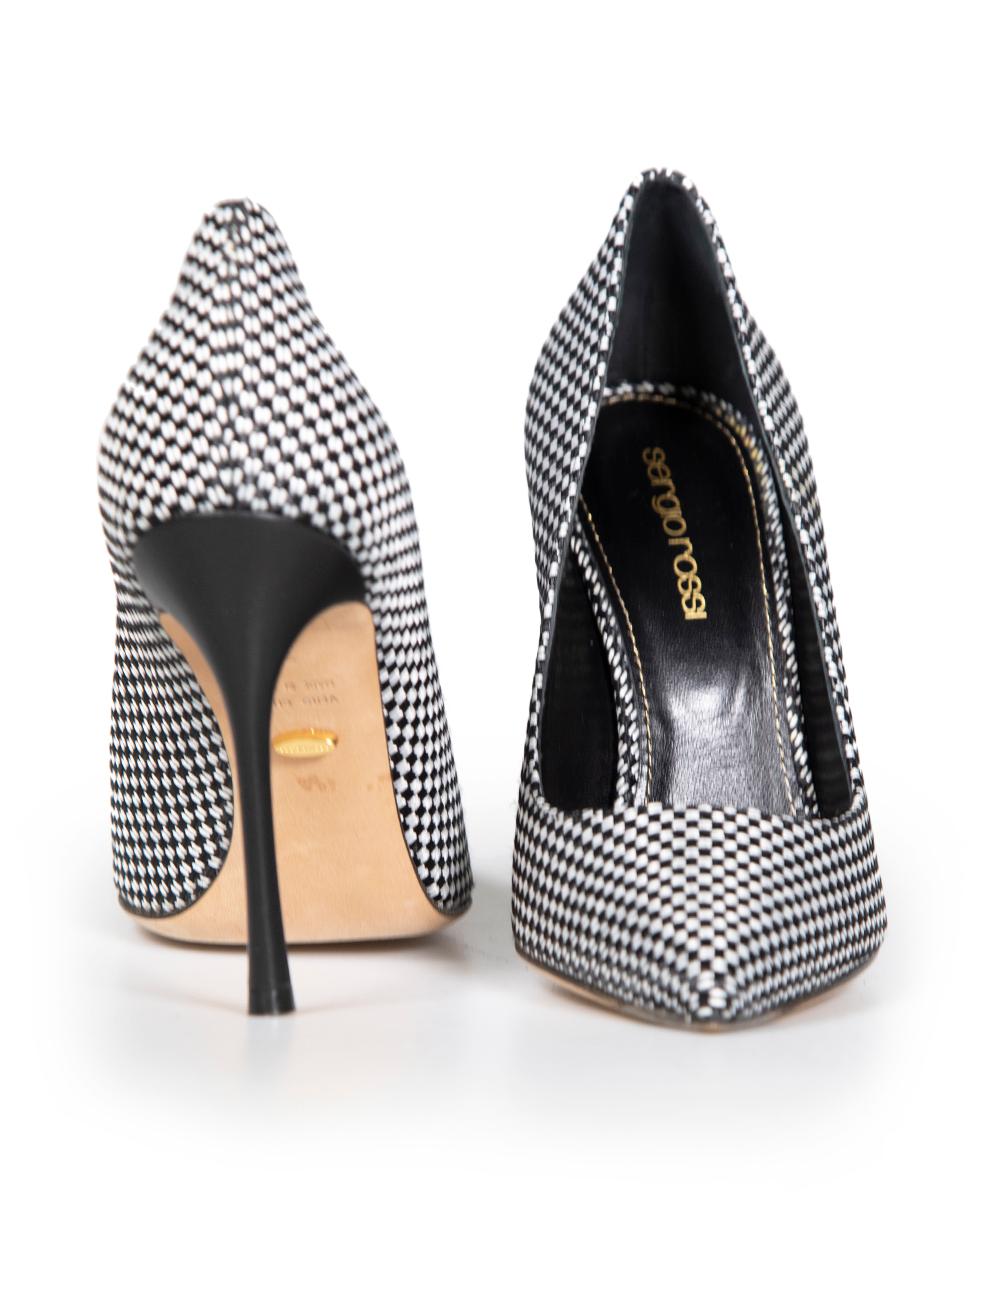 Sergio Rossi Black Weave Pattern Pointed Pumps Size IT 35 In New Condition For Sale In London, GB